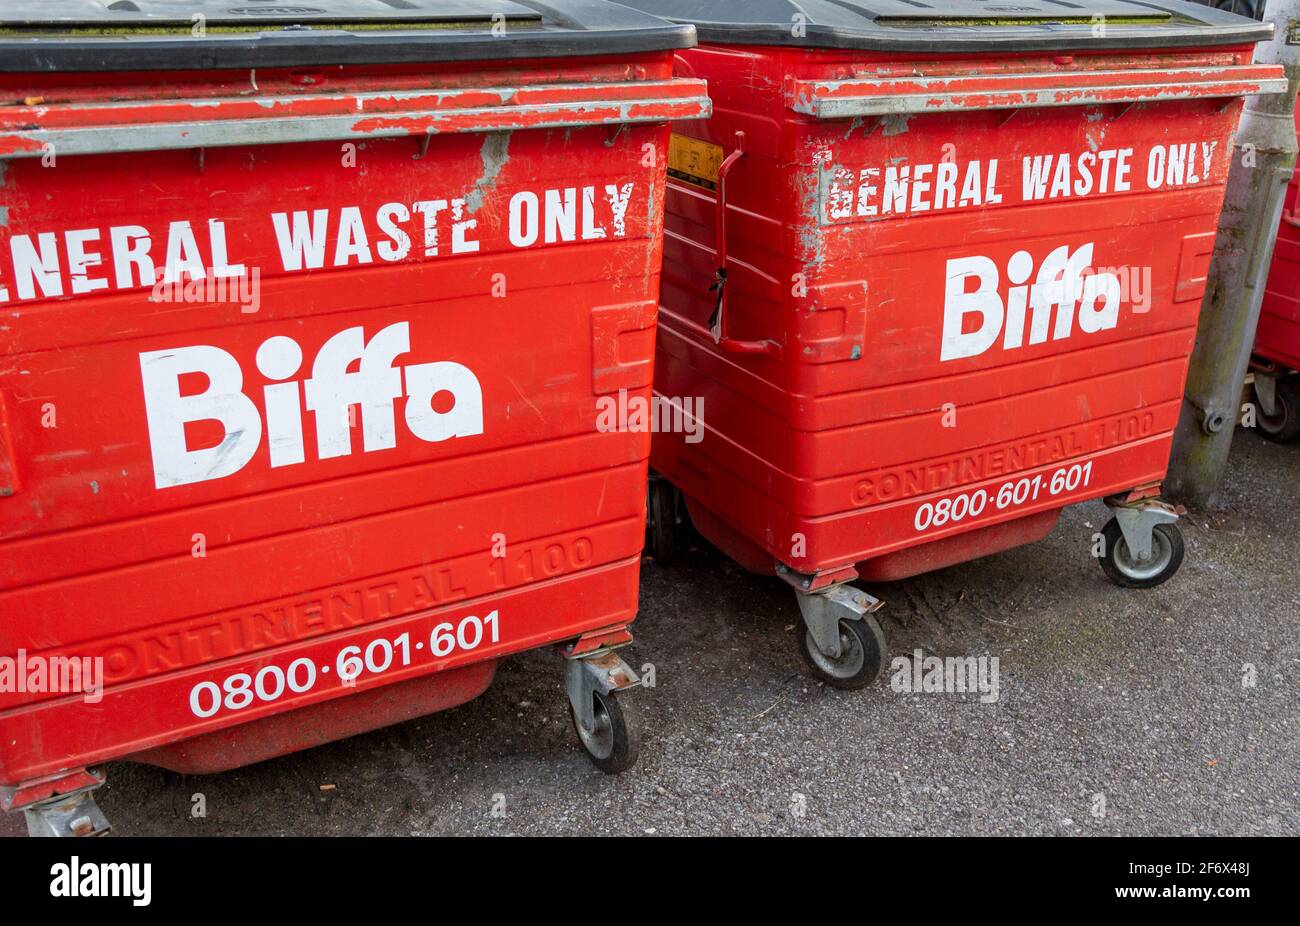 Red Biffa bins for general waste only, Chippenham, Wiltshire,UK Stock Photo